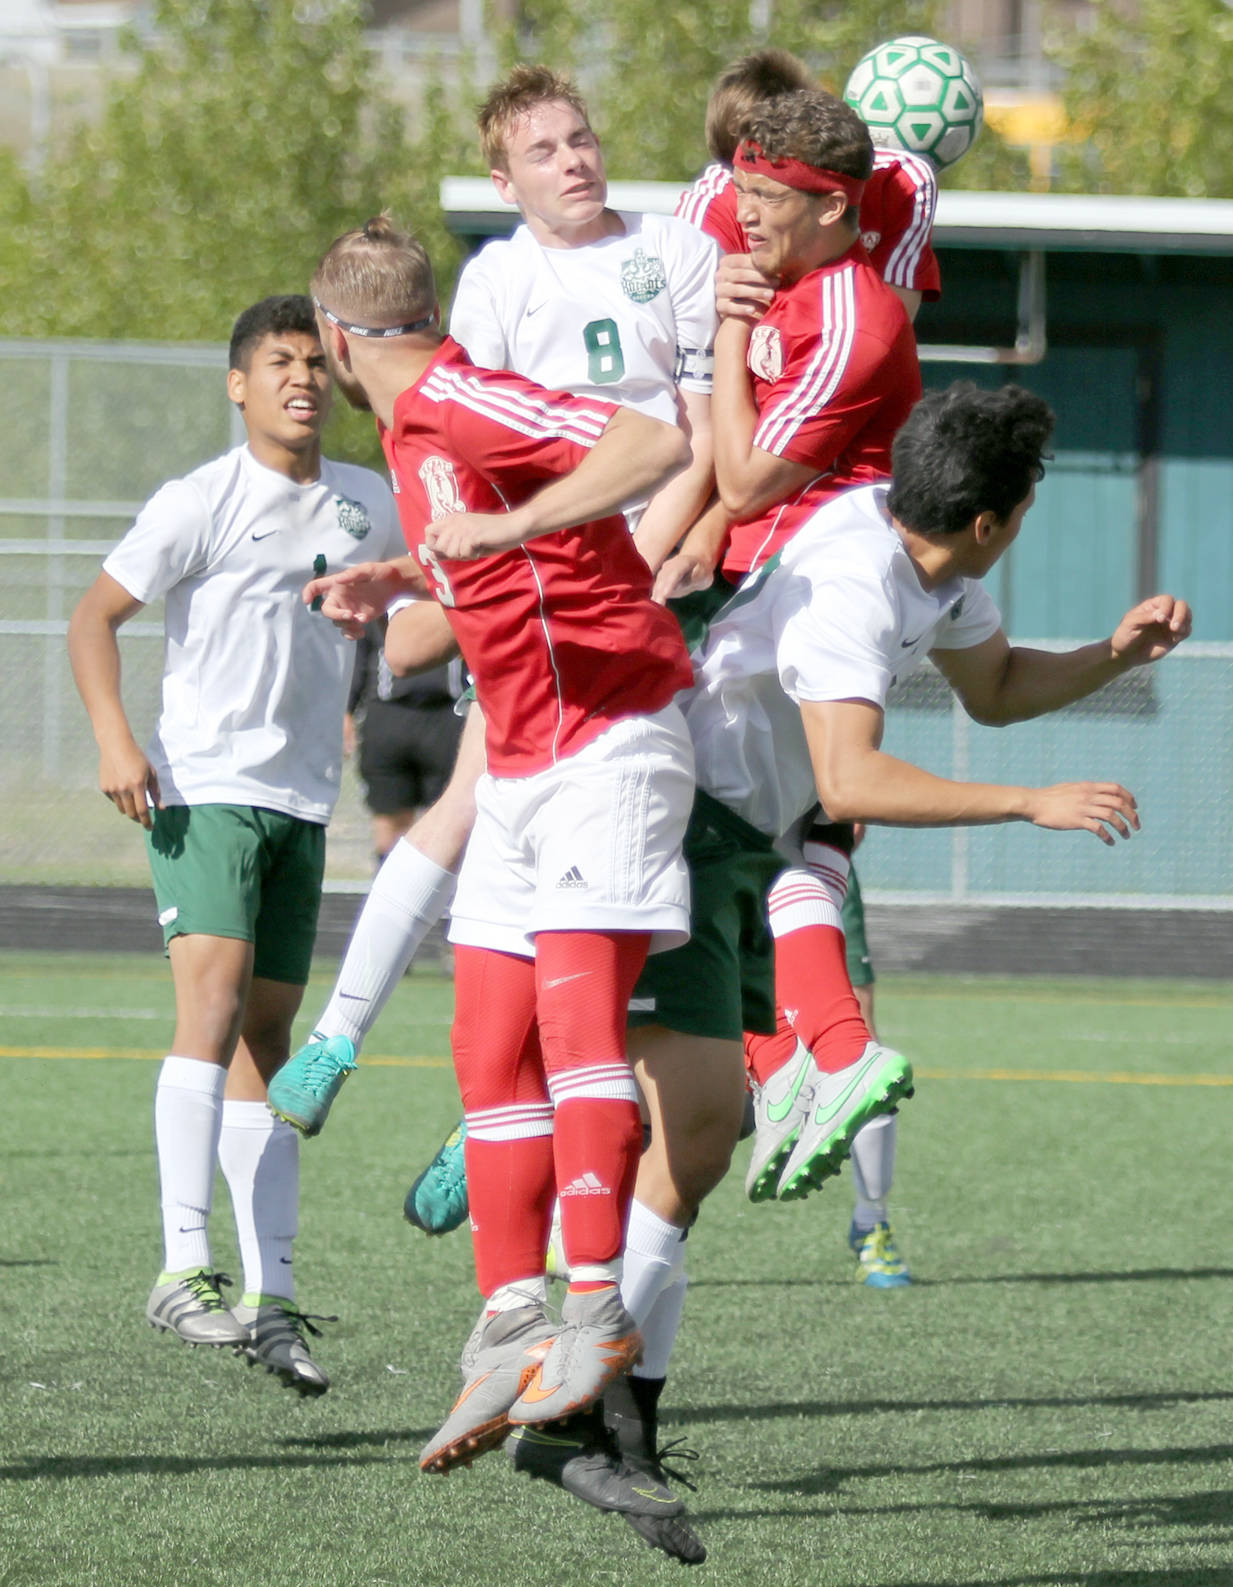 Colony’s Cade Johnstone and Kenai’s Braydon Goodman are among a group of players all going up for a header off a corner kick during Kenai’s 3-1 win over the Knights in the Northern Lights Conference boys title game Saturday, May 20, 2017, at Colony High School. (Photo by Jeremiah Bartz/Frontiersman.com)